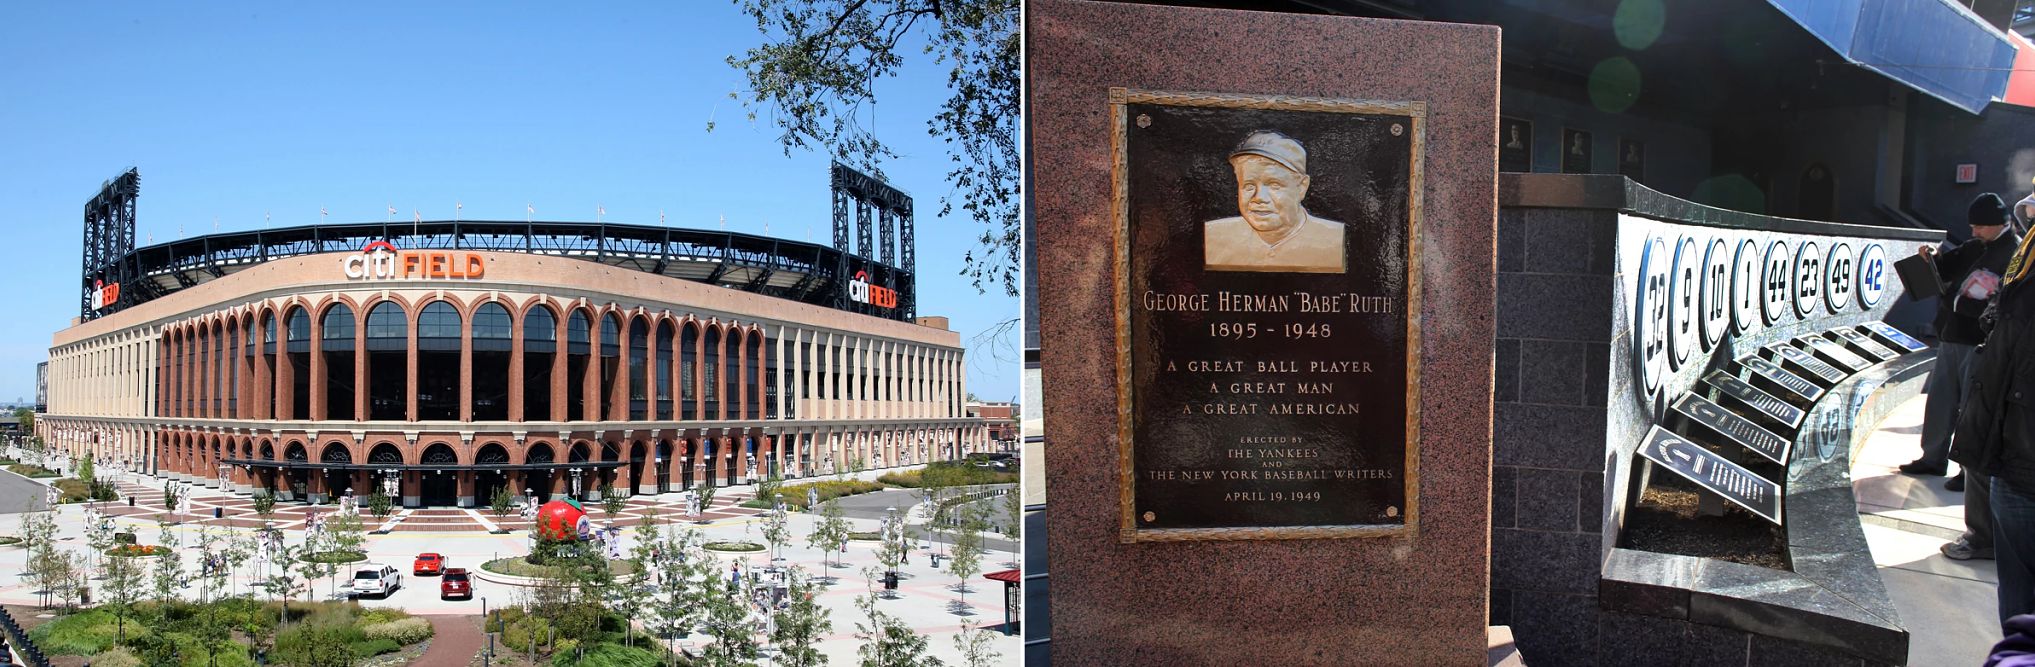 aerial view of Citi Field and a plaque to Babe Ruth in Monument Park